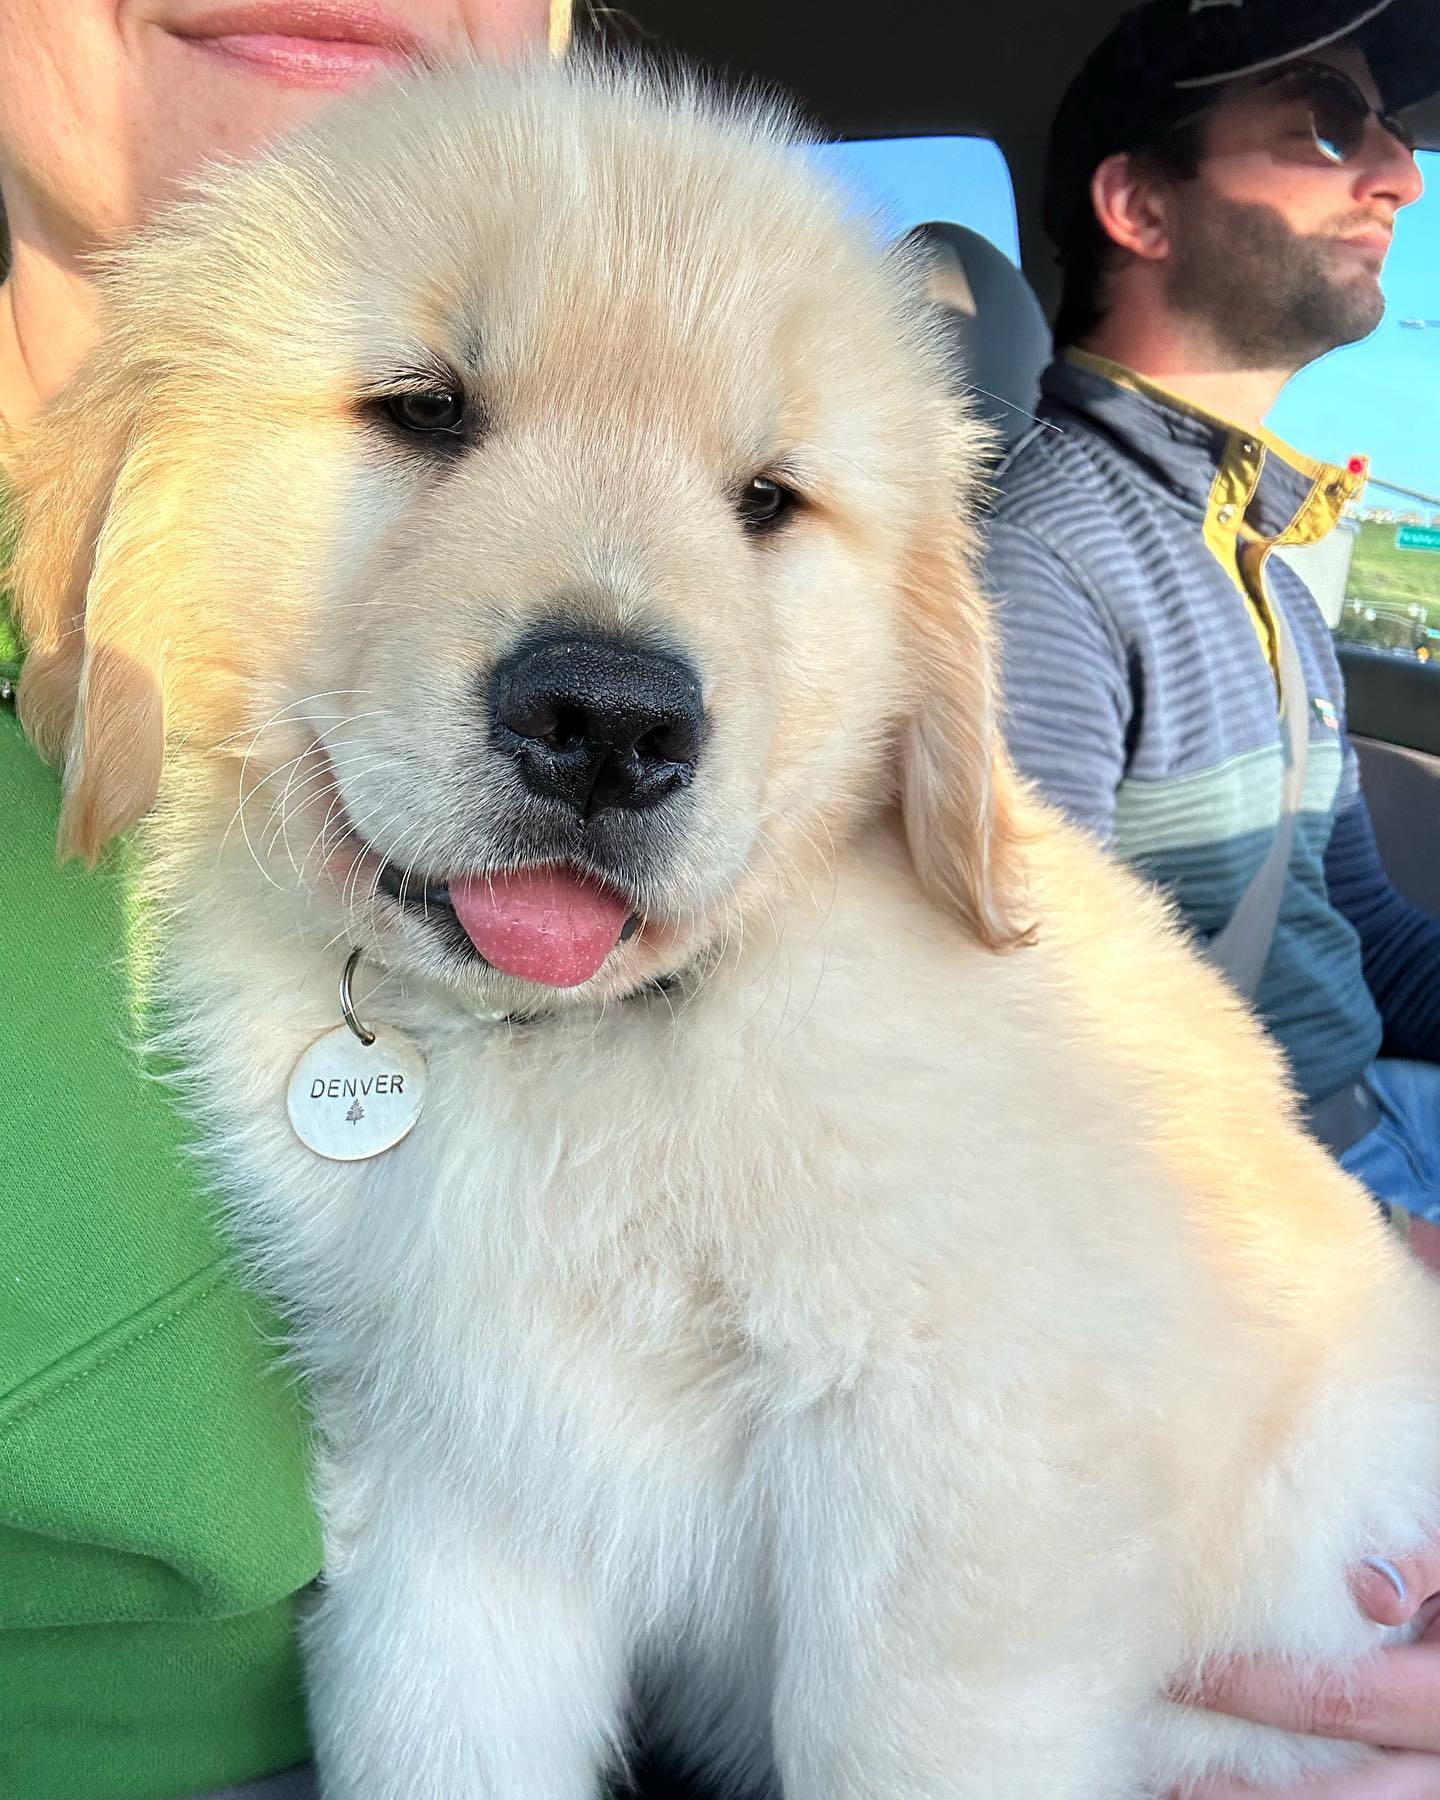 Closeup of a golden retriever puppy with a 'Denver' name tag sitting in a person's lap in the passenger's seat.